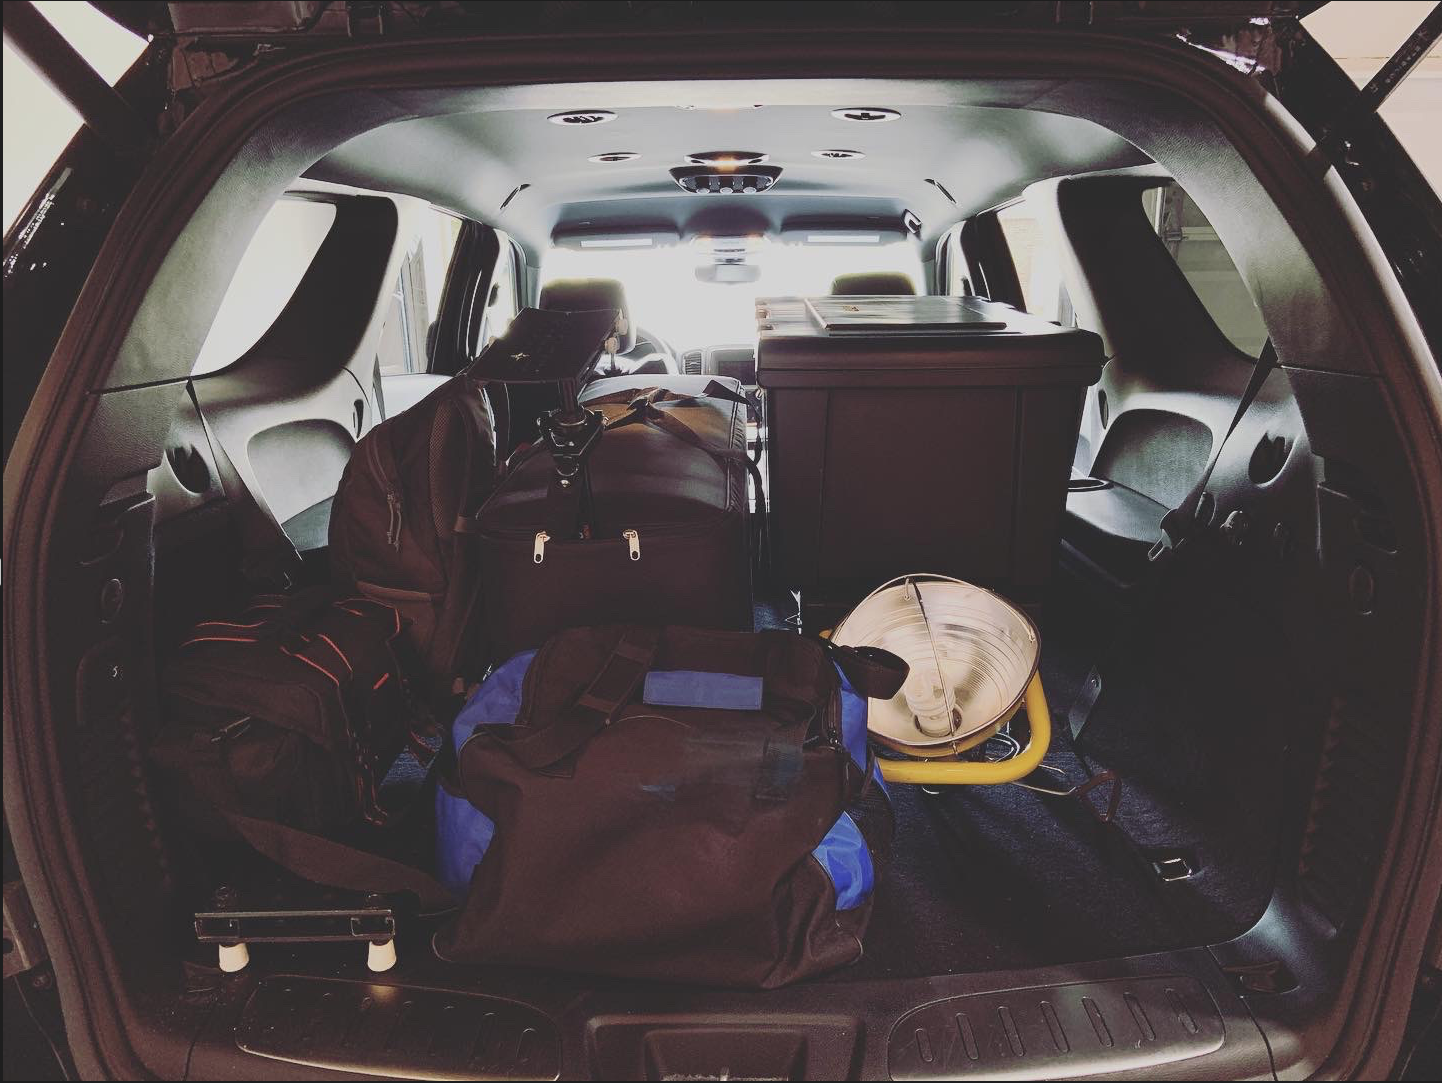 BTS: Vehicle packed with equipment heading out to video shoot